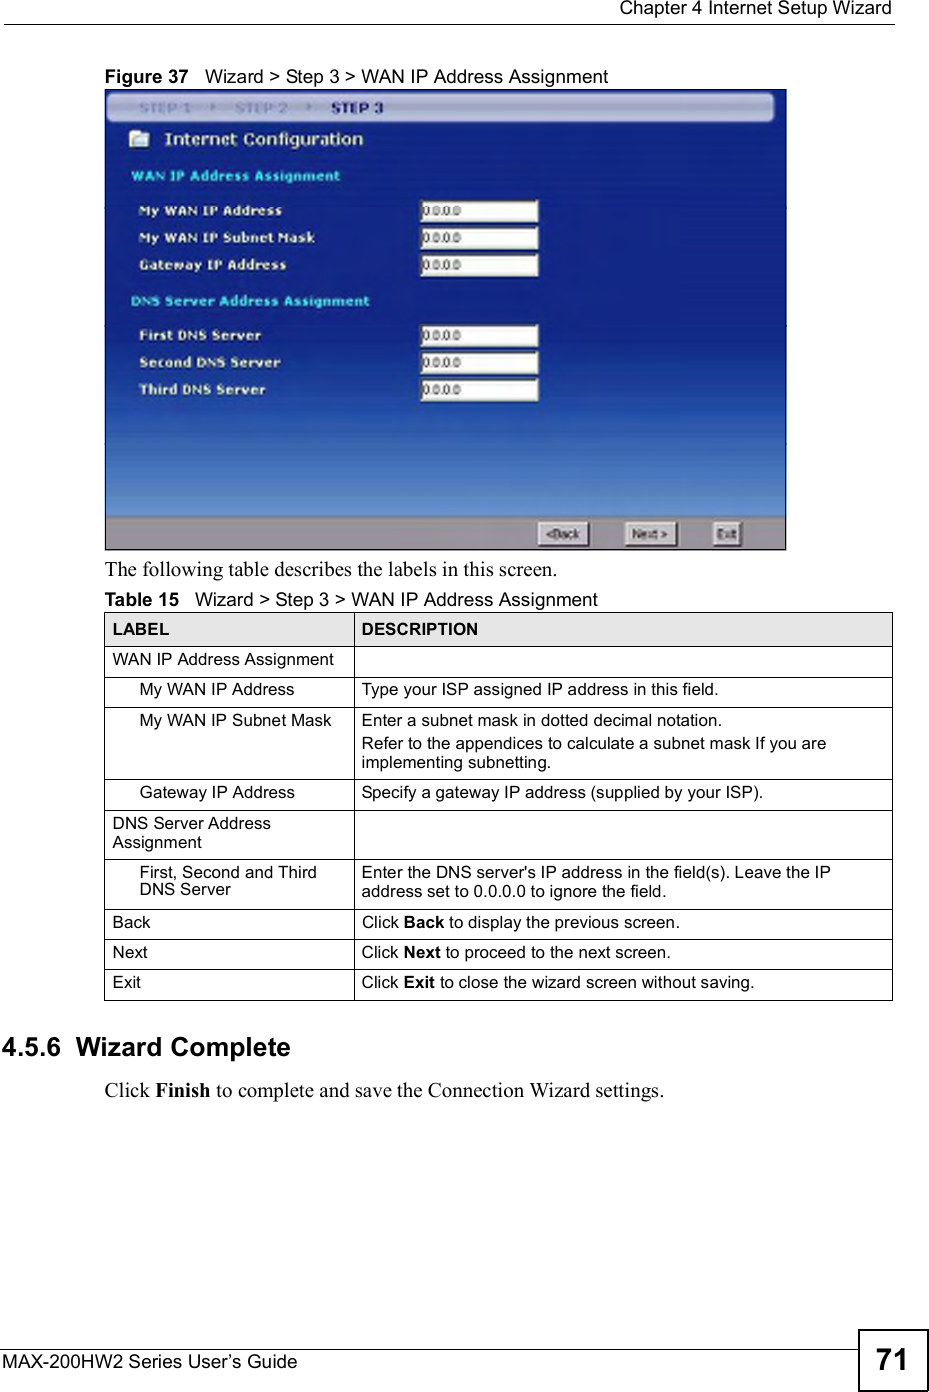  Chapter 4Internet Setup WizardMAX-200HW2 Series User s Guide 71Figure 37   Wizard &gt; Step 3 &gt; WAN IP Address AssignmentThe following table describes the labels in this screen.4.5.6  Wizard CompleteClick Finish to complete and save the Connection Wizard settings.Table 15   Wizard &gt; Step 3 &gt; WAN IP Address AssignmentLABEL DESCRIPTIONWAN IP Address AssignmentMy WAN IP AddressType your ISP assigned IP address in this field.My WAN IP Subnet MaskEnter a subnet mask in dotted decimal notation.Refer to the appendicesto calculate a subnet mask If you are implementing subnetting.Gateway IP AddressSpecify a gateway IP address (supplied by your ISP).DNS Server Address AssignmentFirst, Second and Third DNS ServerEnter the DNS server&apos;s IP address in the field(s). Leave the IP address set to 0.0.0.0 to ignore the field.BackClick Back to display the previous screen.Next Click Next to proceed to the next screen.Exit Click Exit to close the wizard screen without saving.